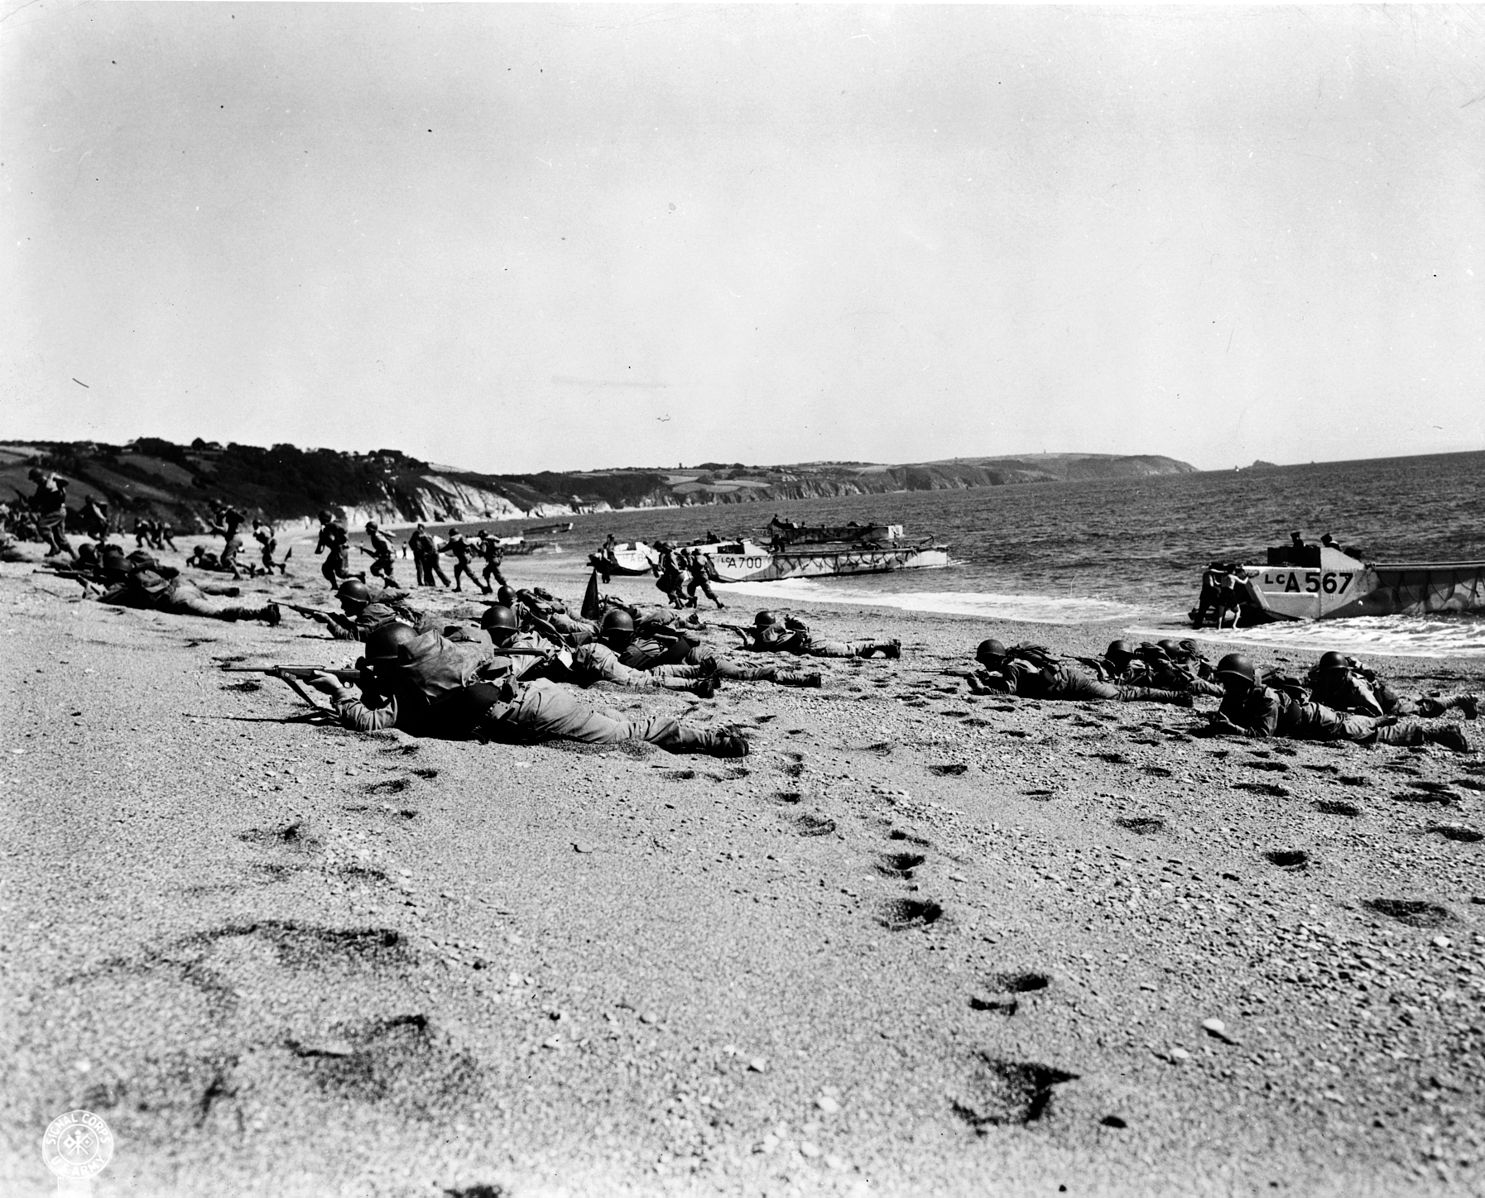 American troops landing on beach in England during rehearsal for invasion of Nazi occupied France ("<a href="https://en.wikipedia.org/wiki/Exercise_Tiger">Exercise Tiger</a>").